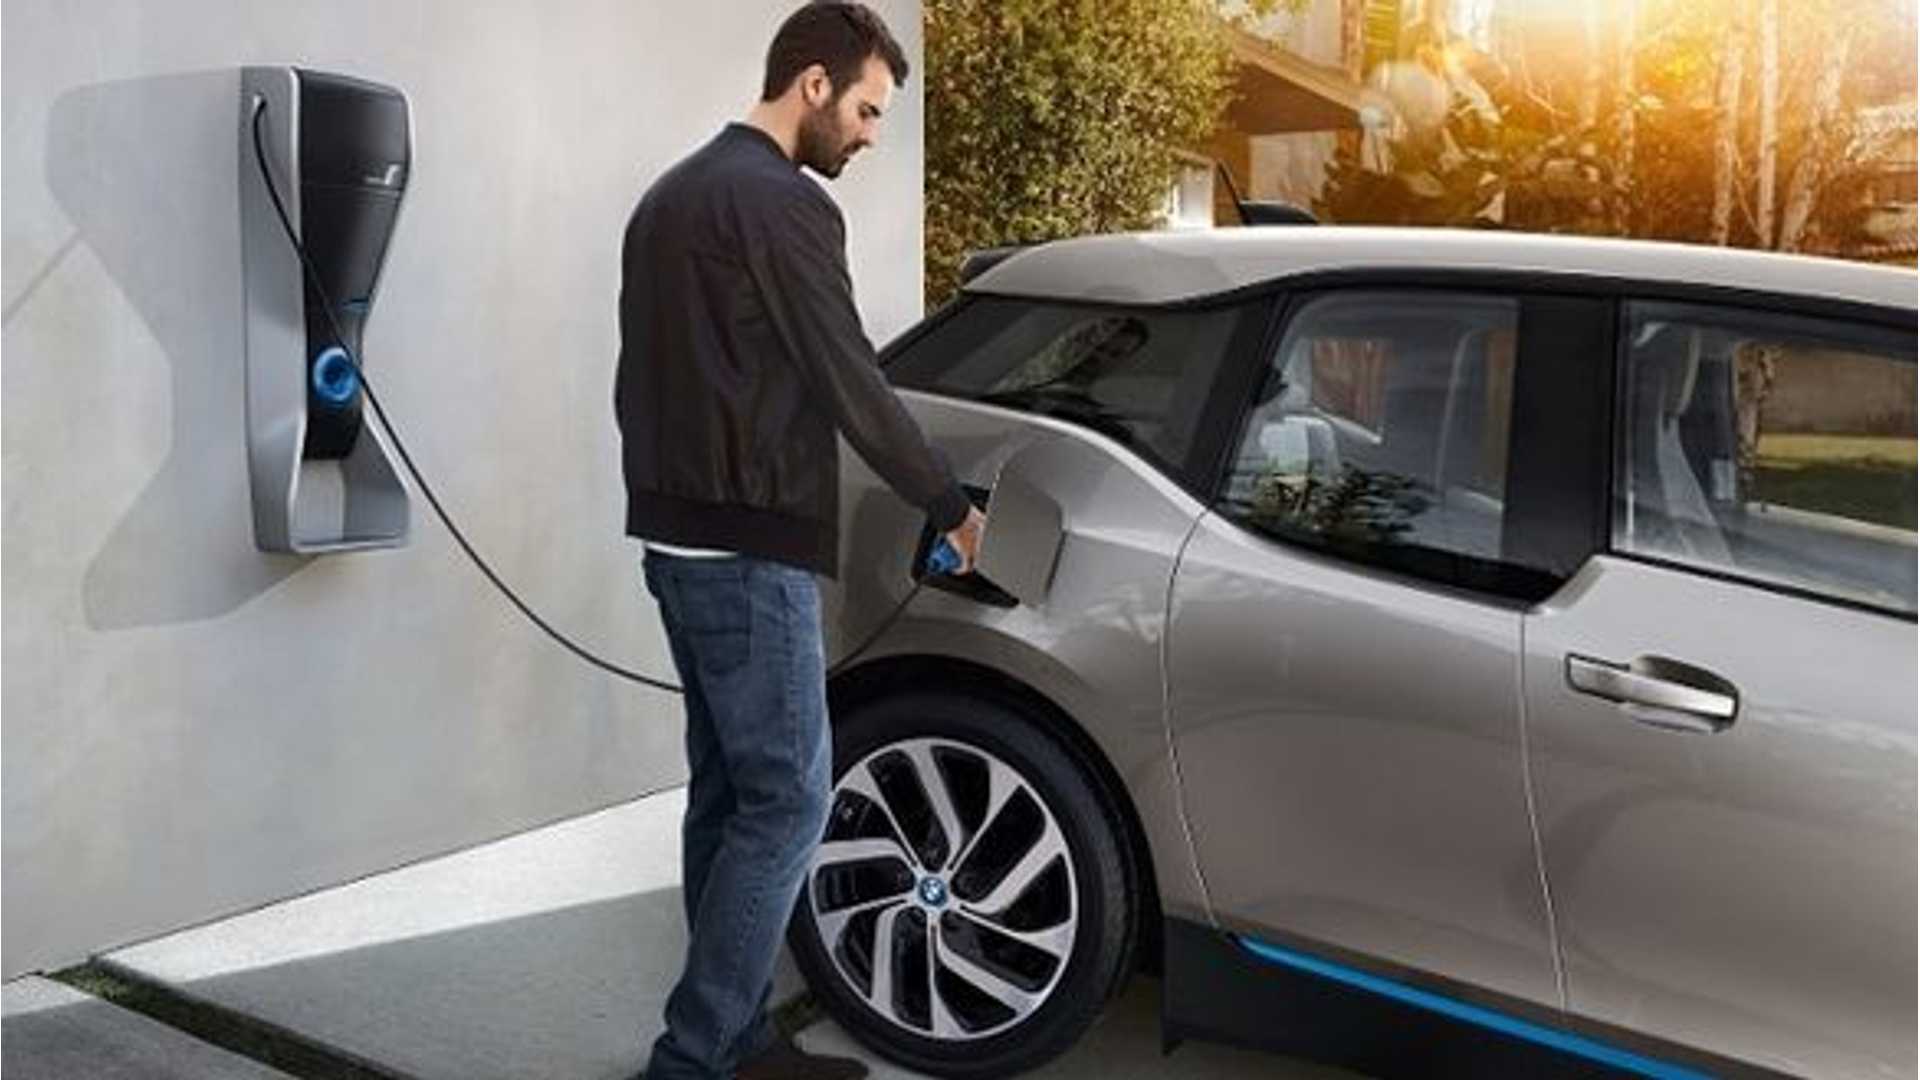 81% of Electric Vehicle Charging is Done at Home